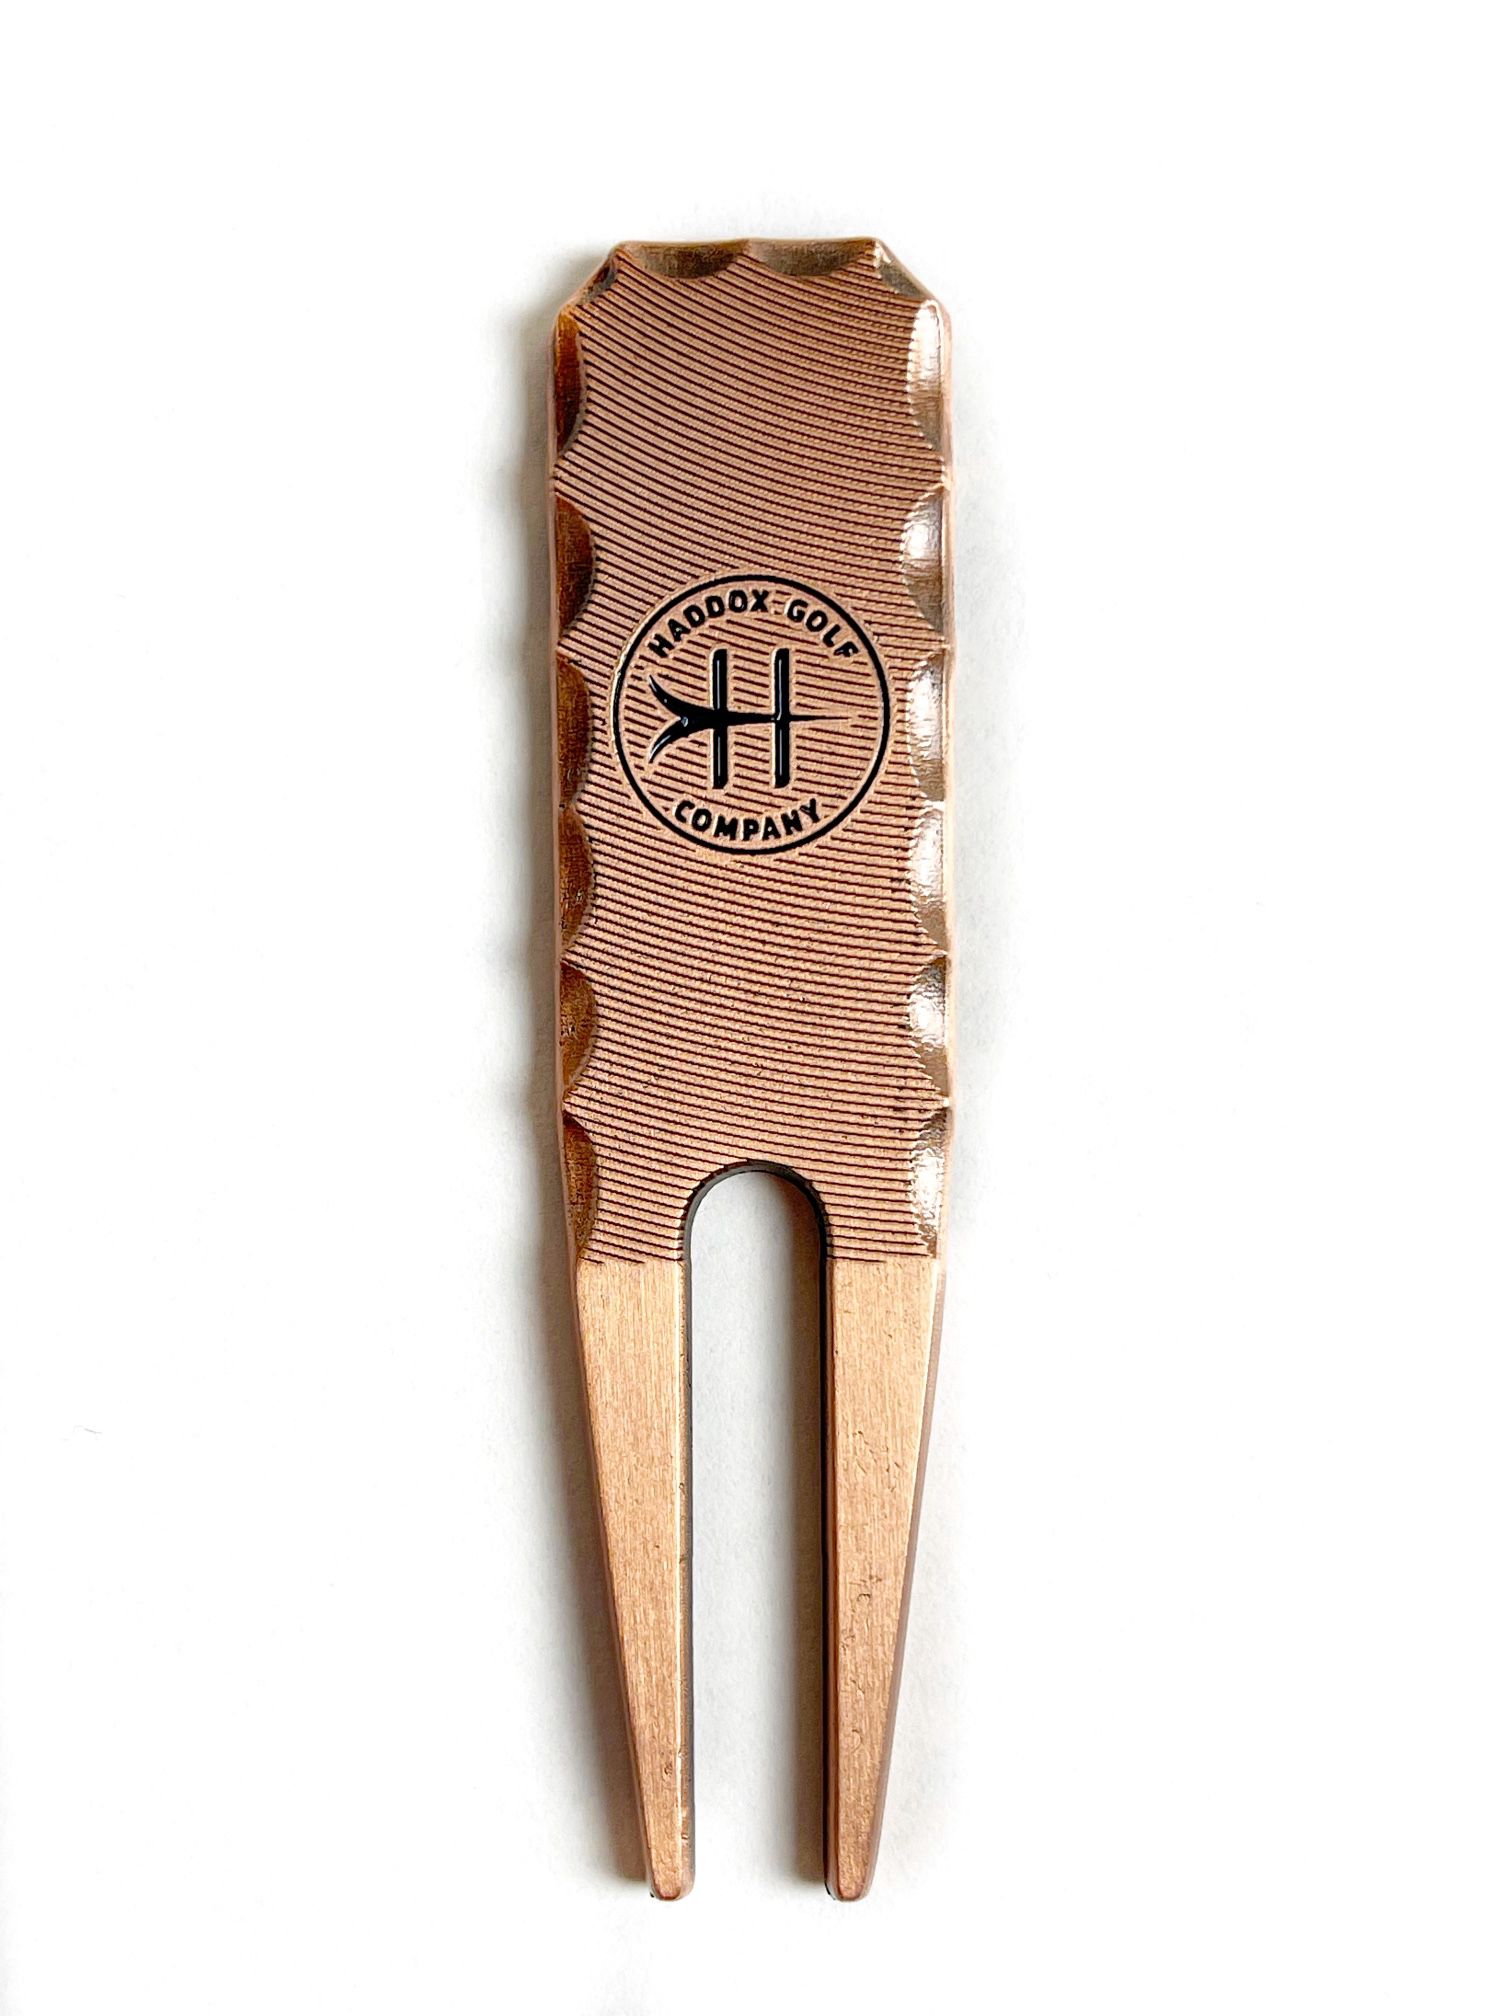 #1 Best Divot Tool - Transform Your Game 😎